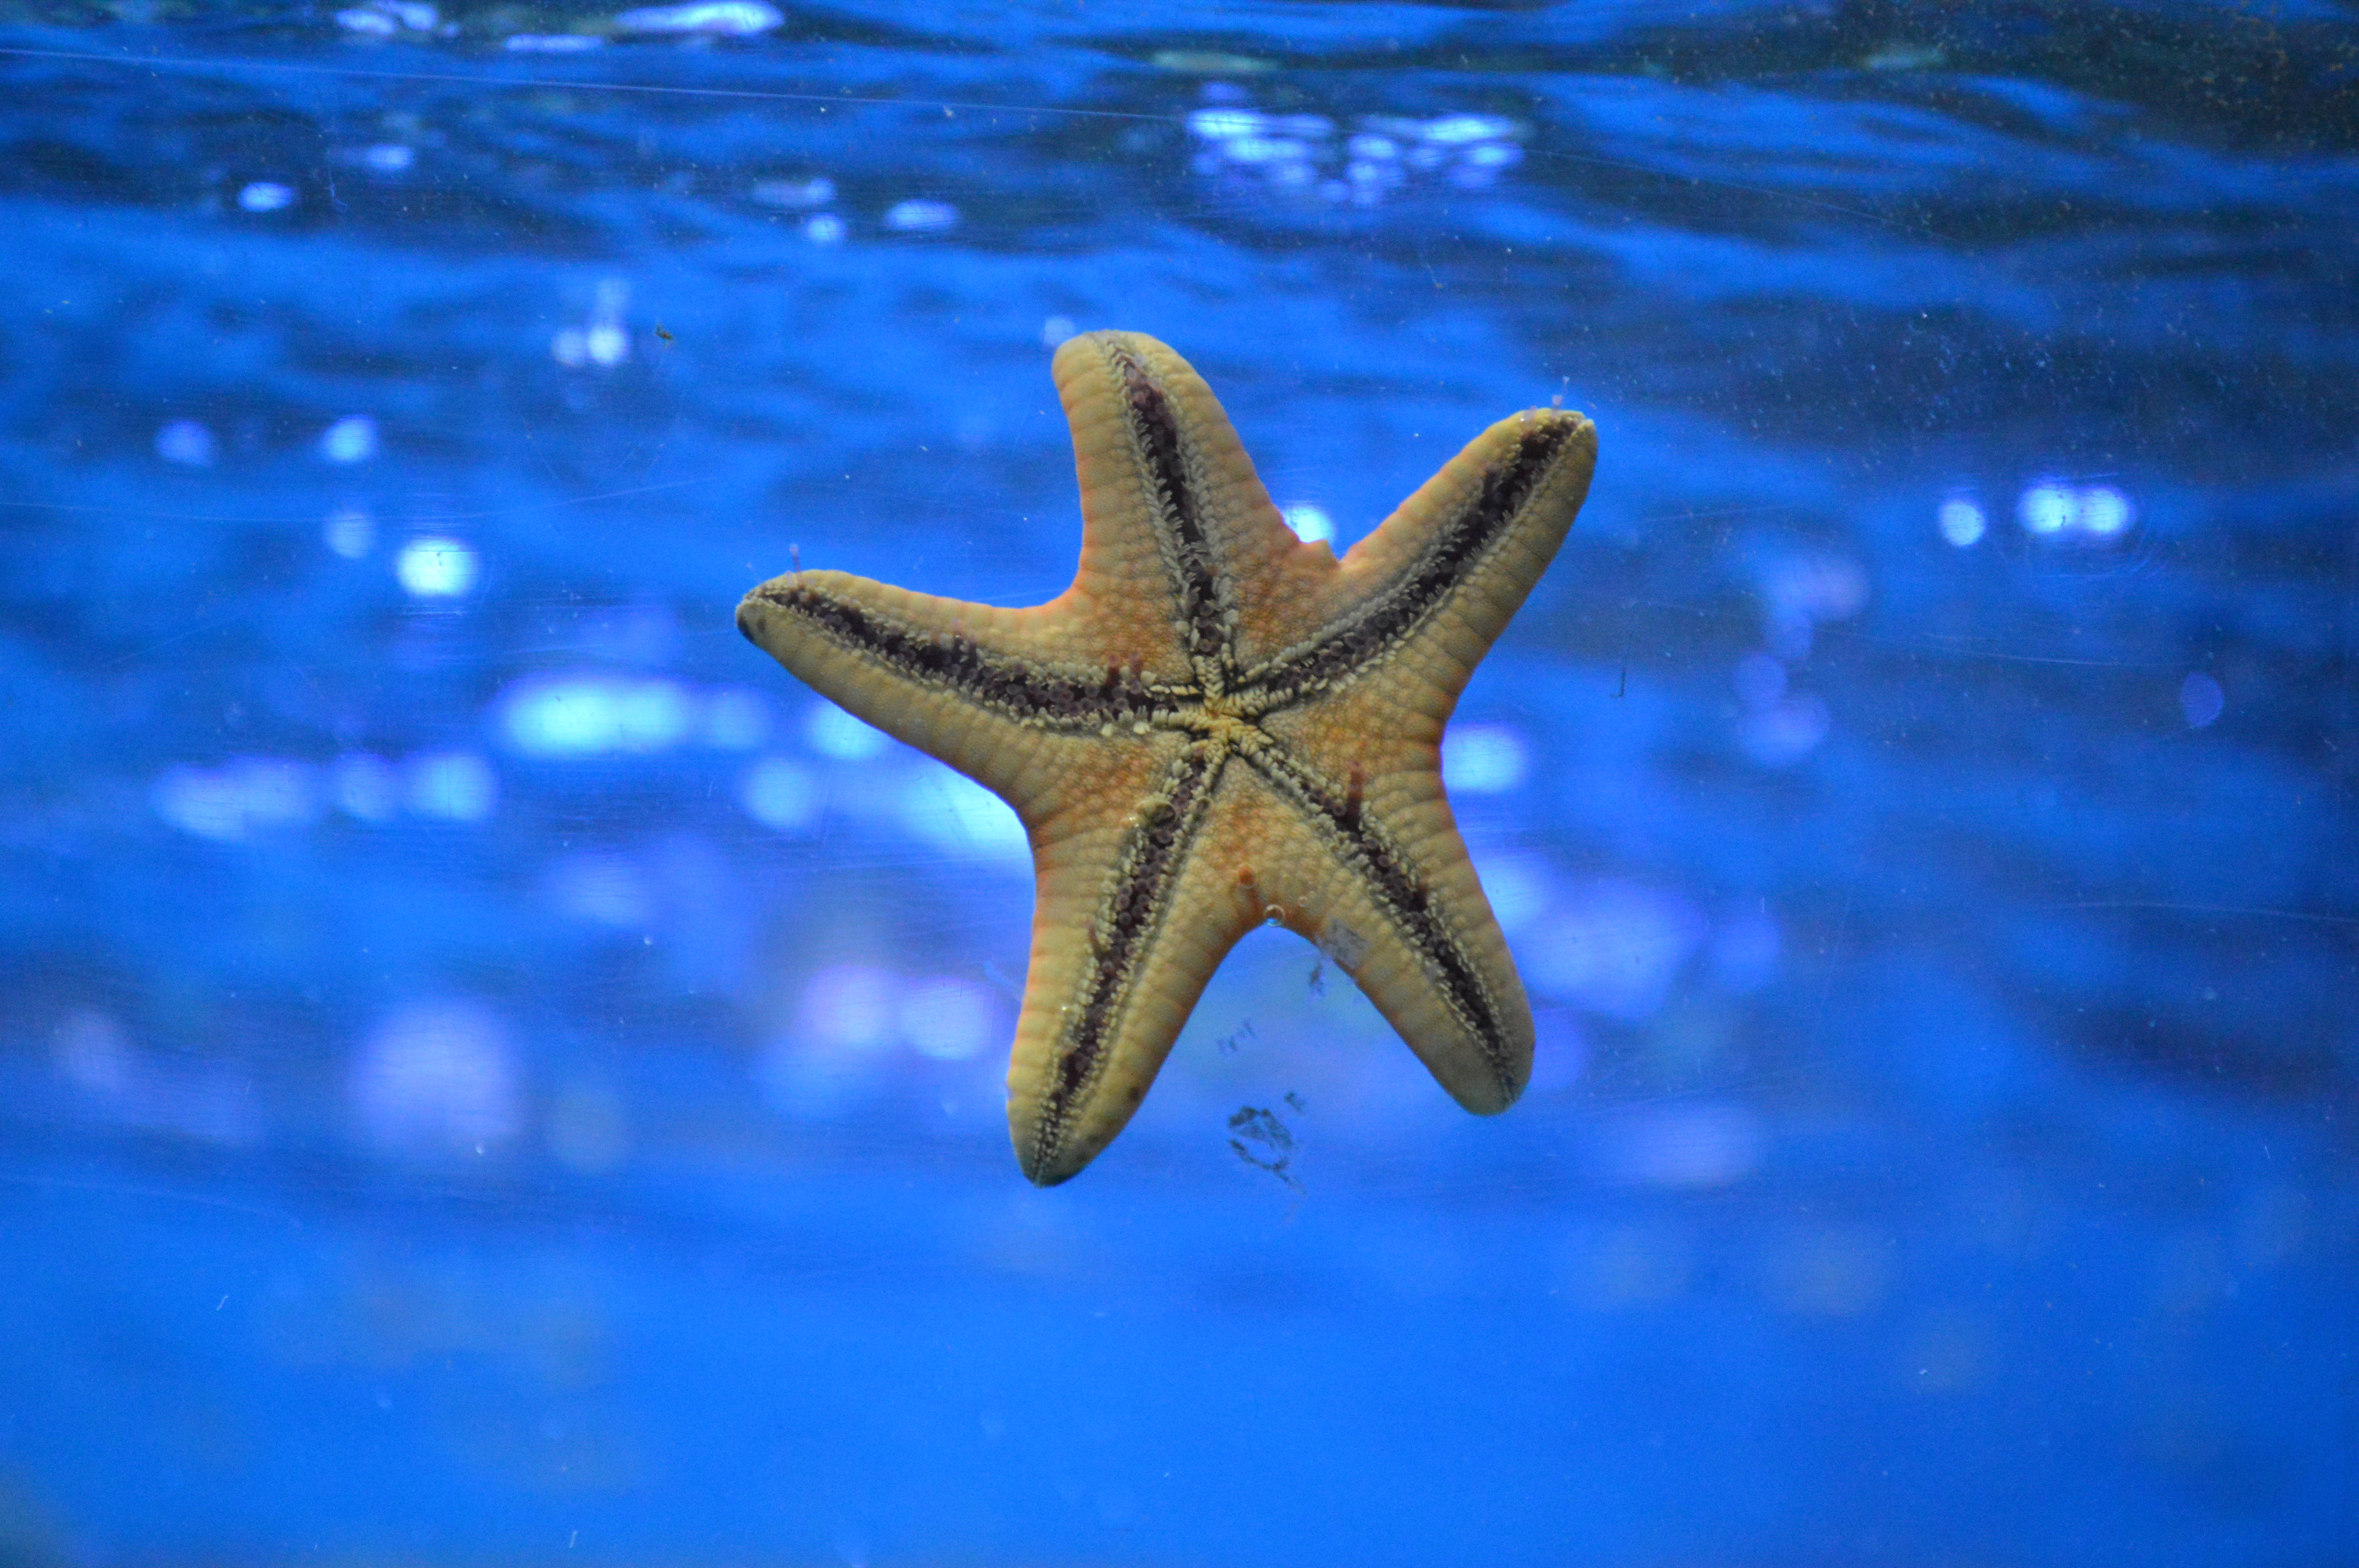 Why We Should Not Lift Starfish Out Of The Water: It's Fatal!